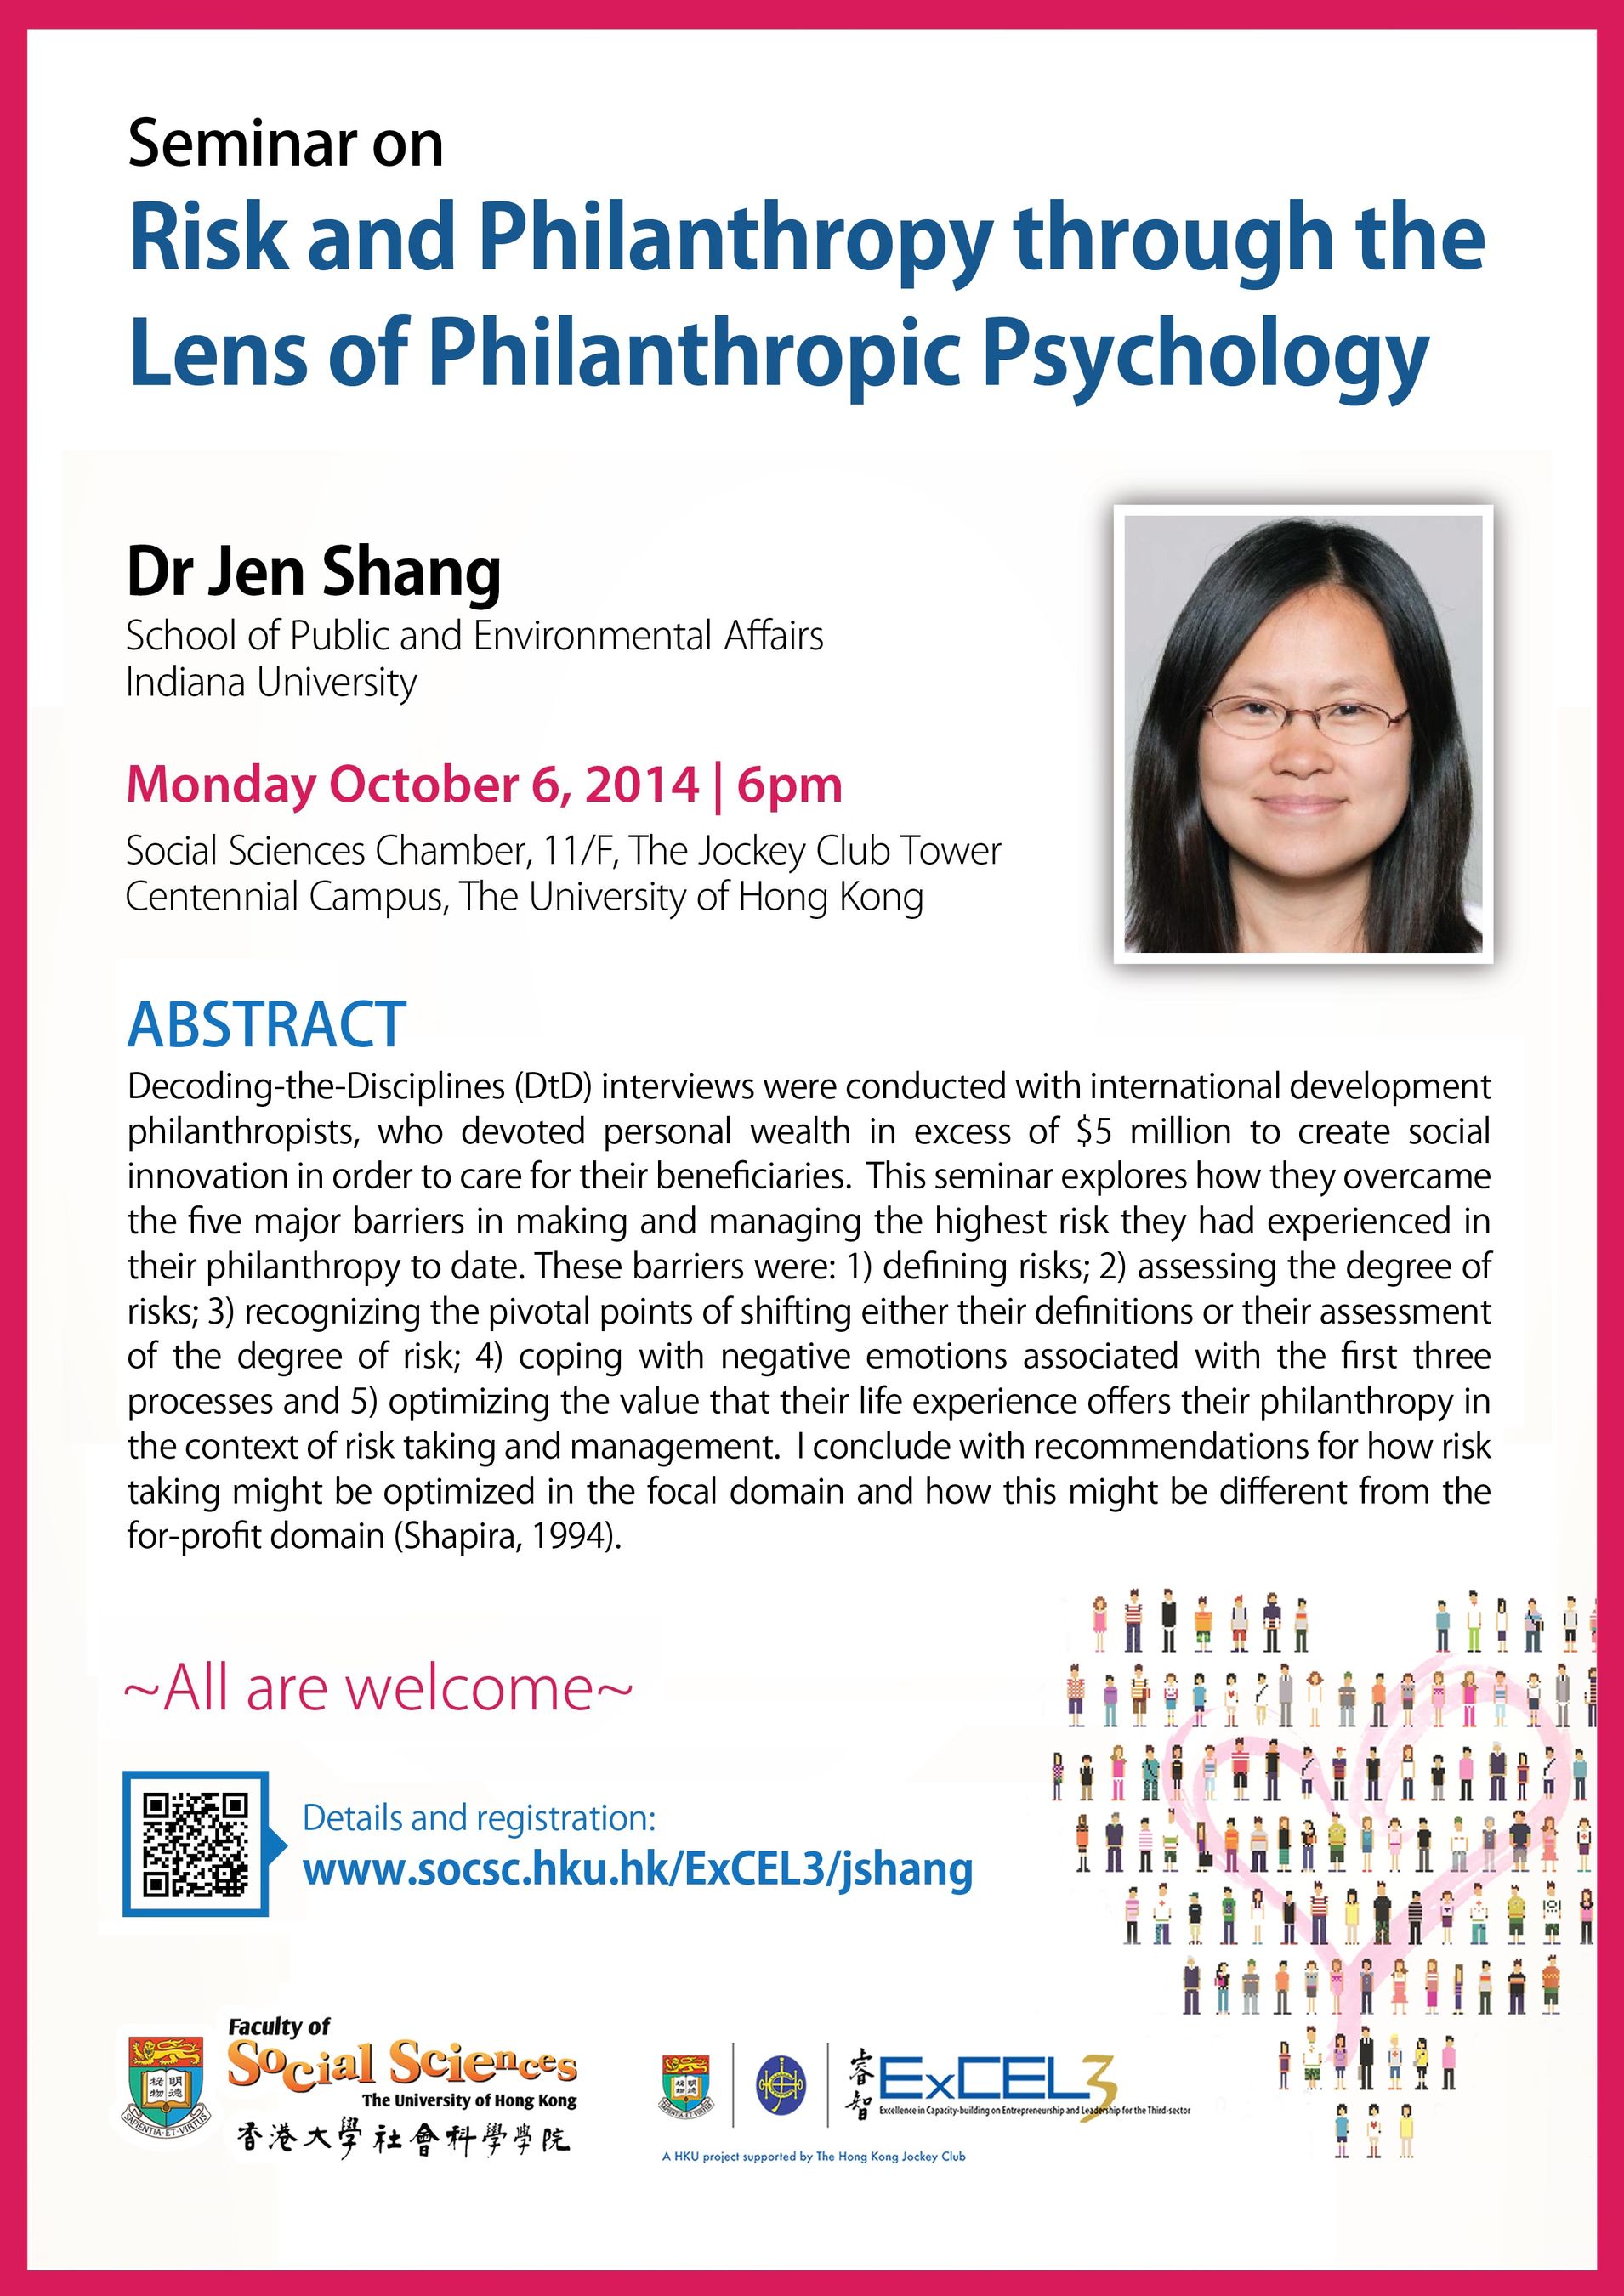 Seminar on Risk and Philanthropy through the Lens of Philanthropic Psychology